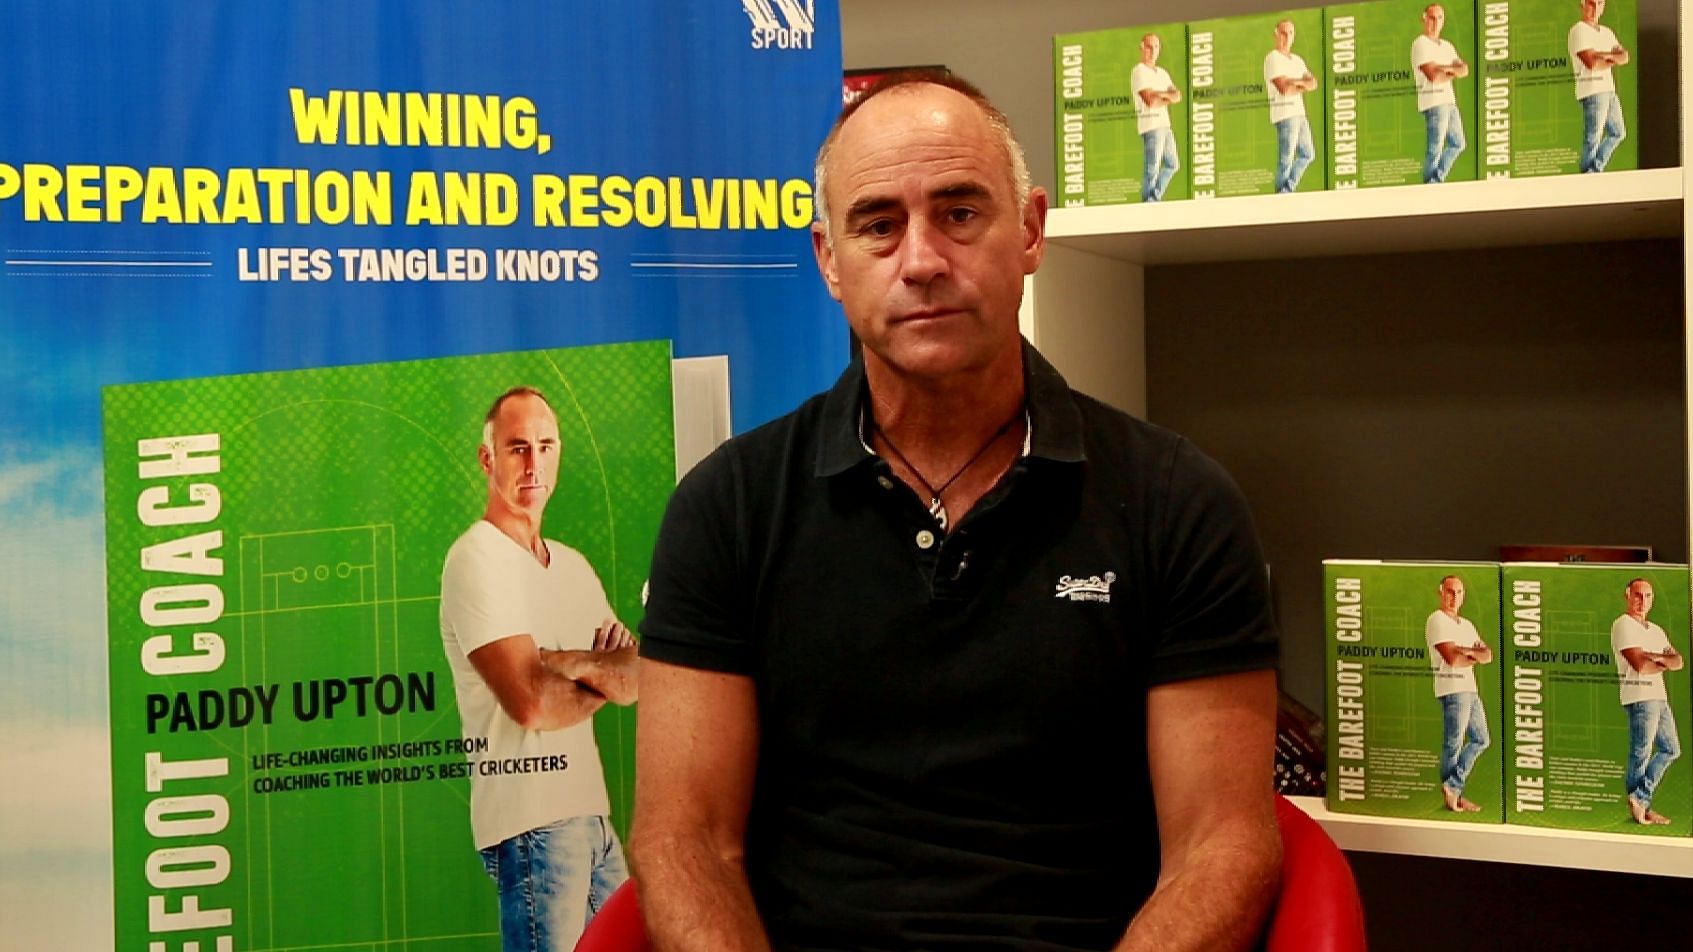 In his autobiography ‘The Barefoot Coach’, Paddy Upton has spoken about his days with Team India as their mental conditioning strategic leadership coach from 2008 till 2011.&nbsp;